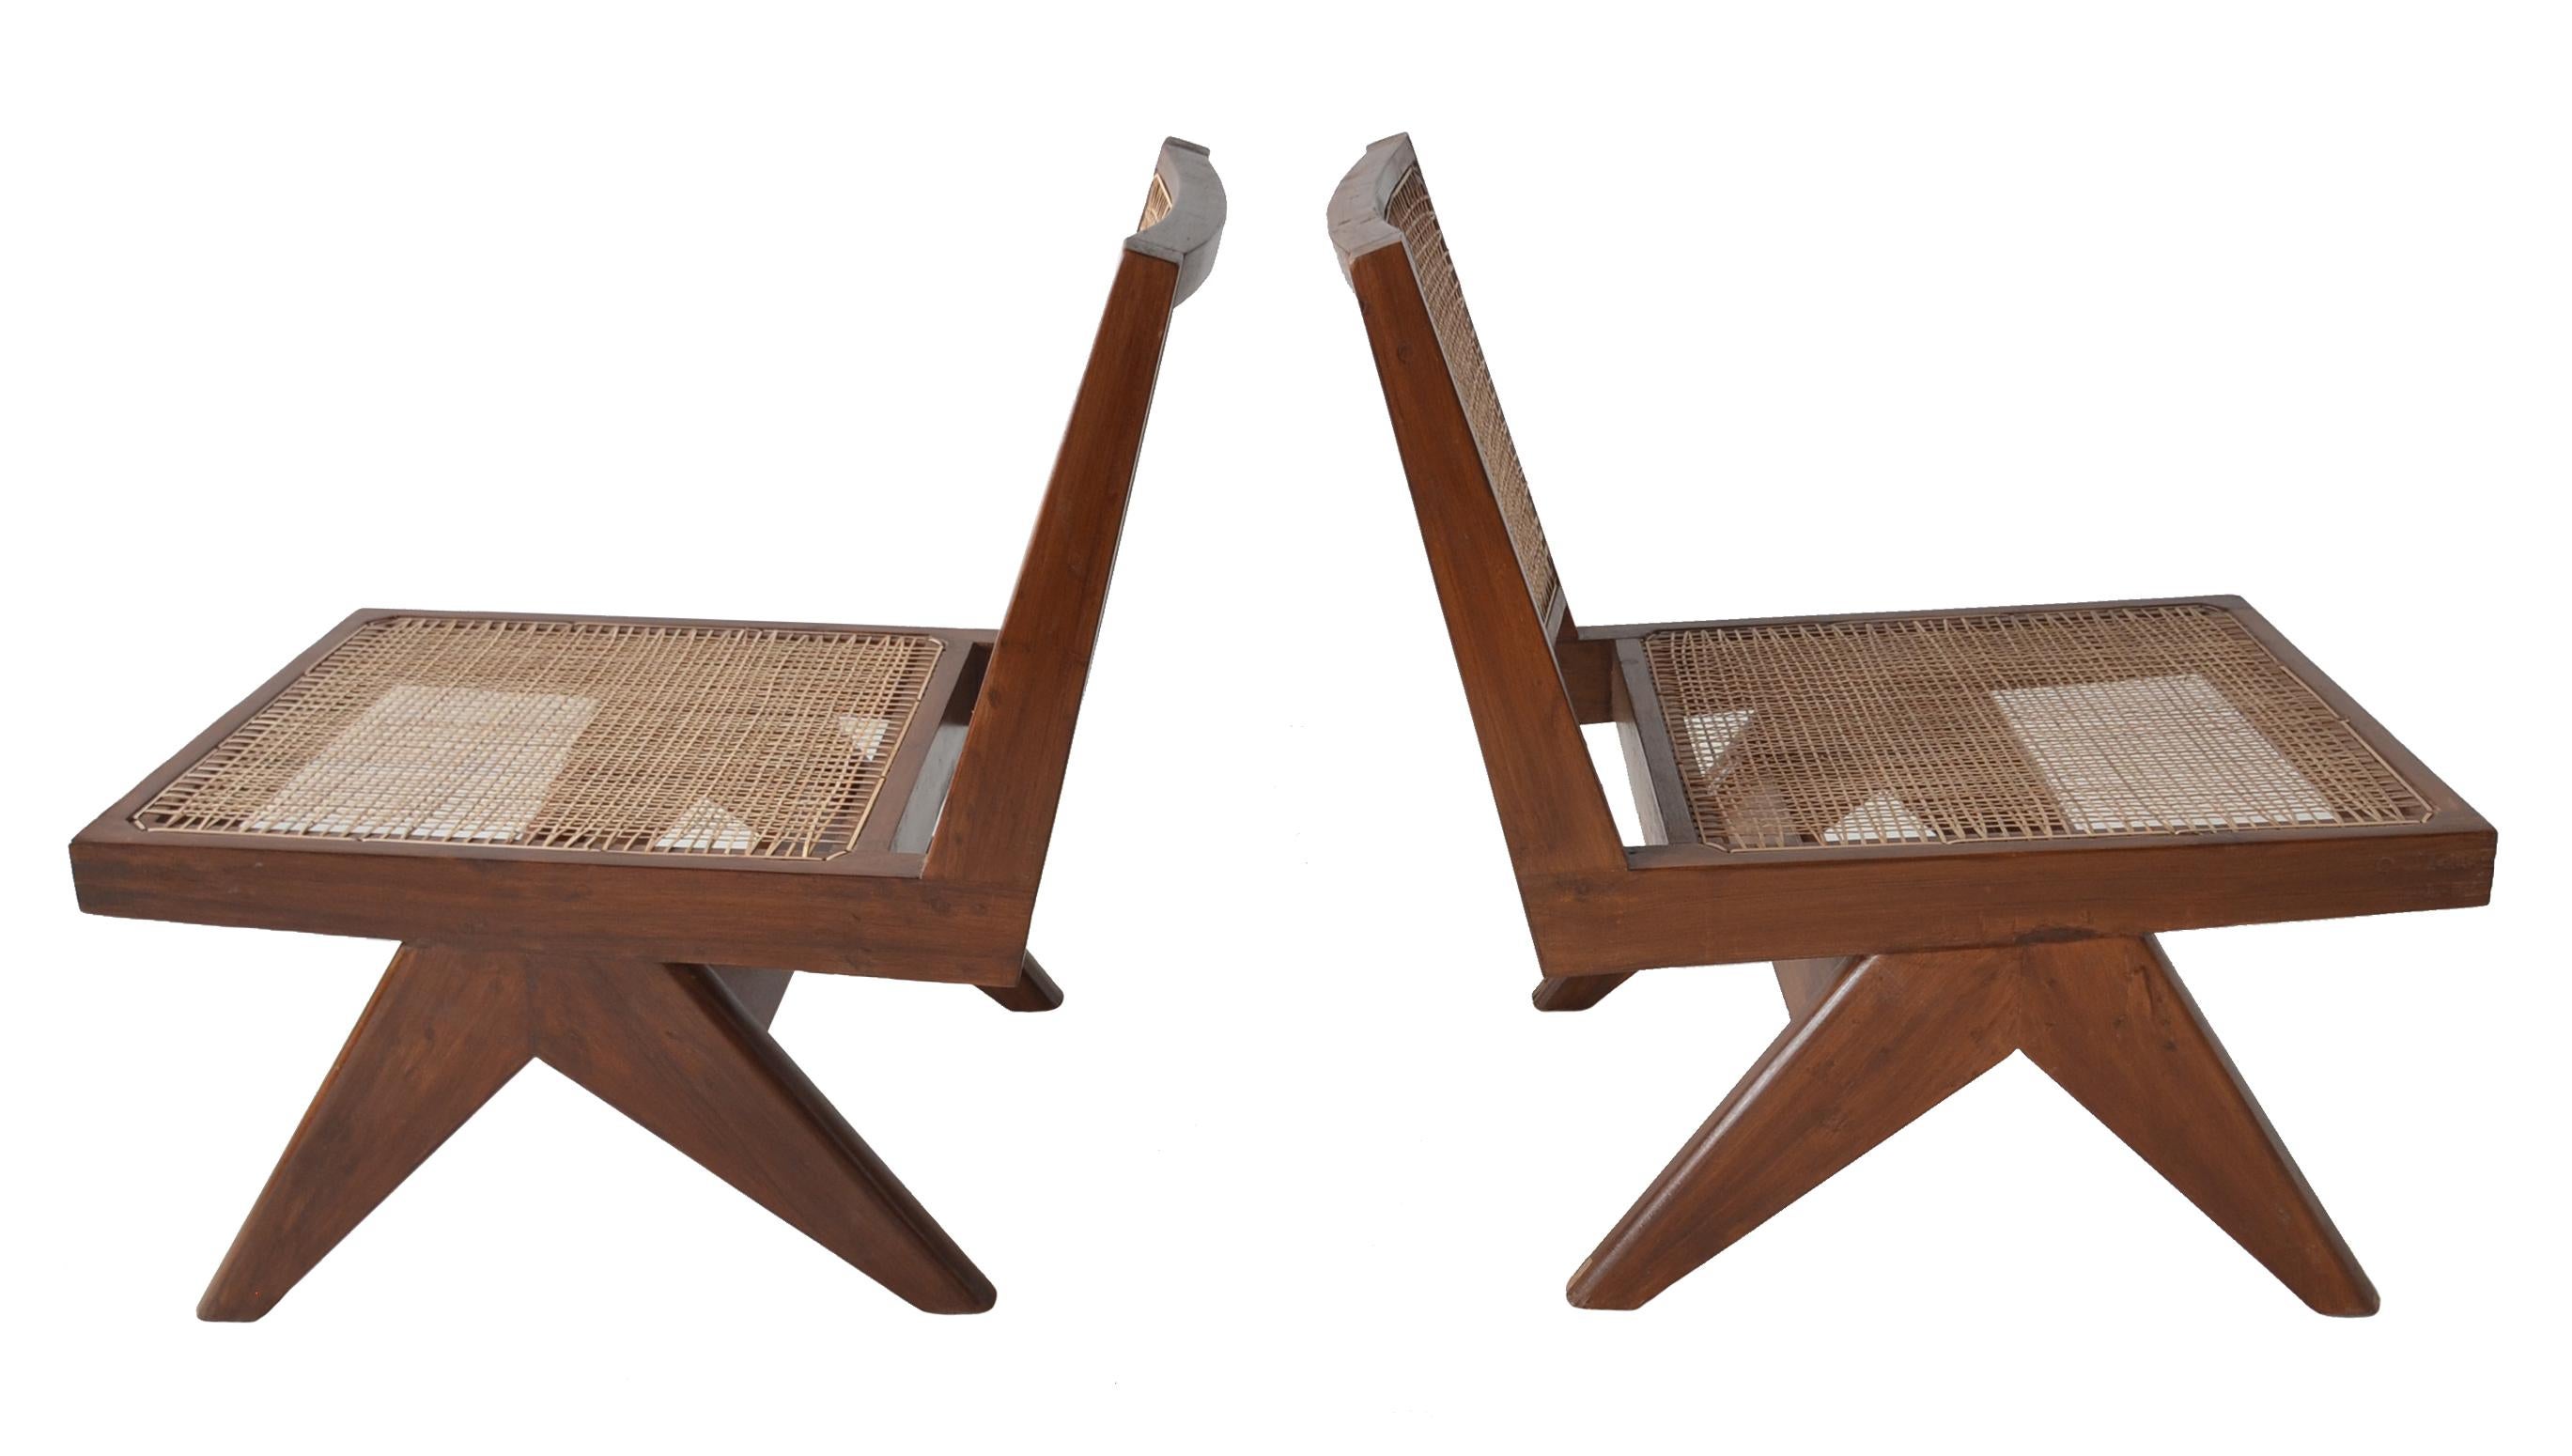 A terrific pair of rare armless low lounge chairs with caned seats by Pierre Jeanneret for the Chandigarh project.
Model PJ-SI-35-A circa 1960

Solid teak construction with caned seats and backs. 

These chairs have undergone a sympathetic